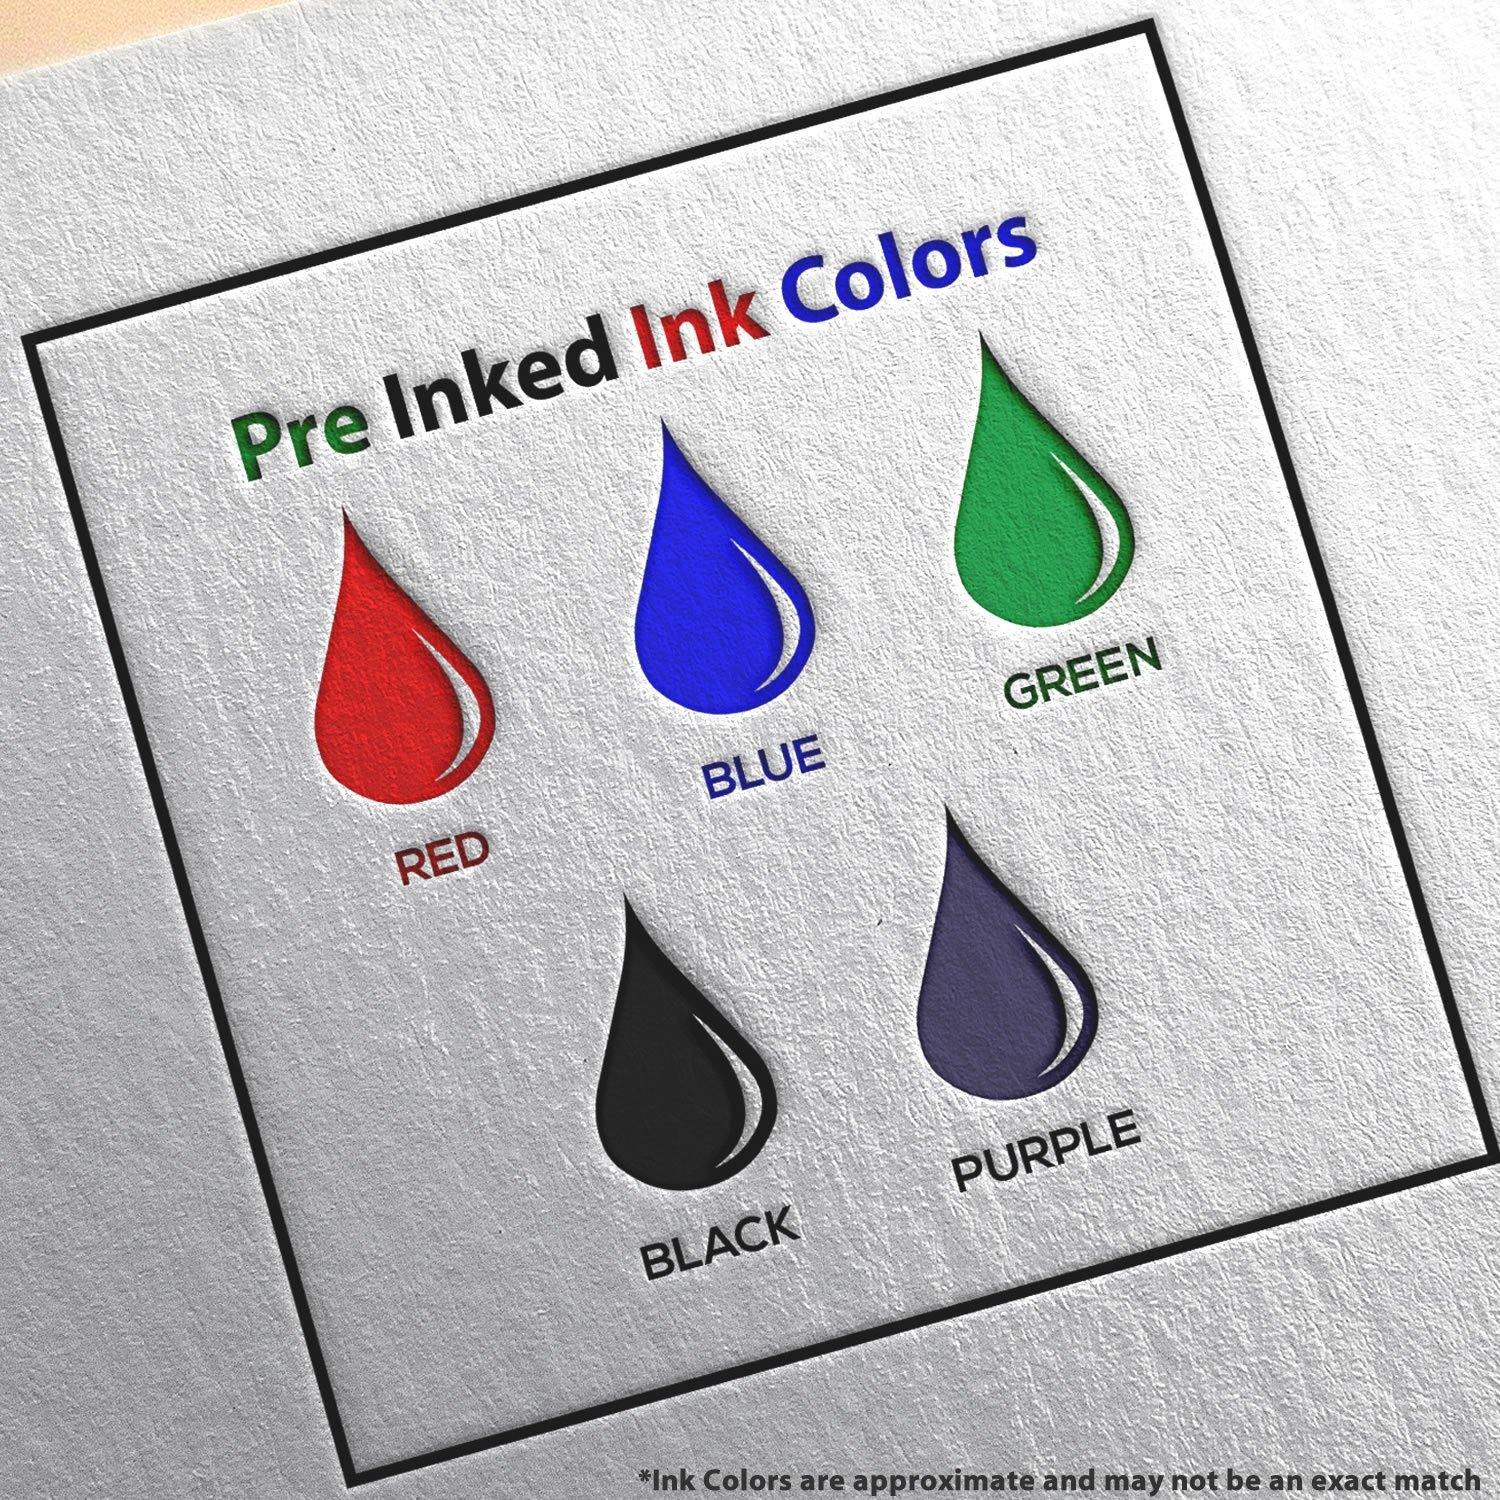 Slim Pre-Inked Faxed with Line Stamp Ink Color Options